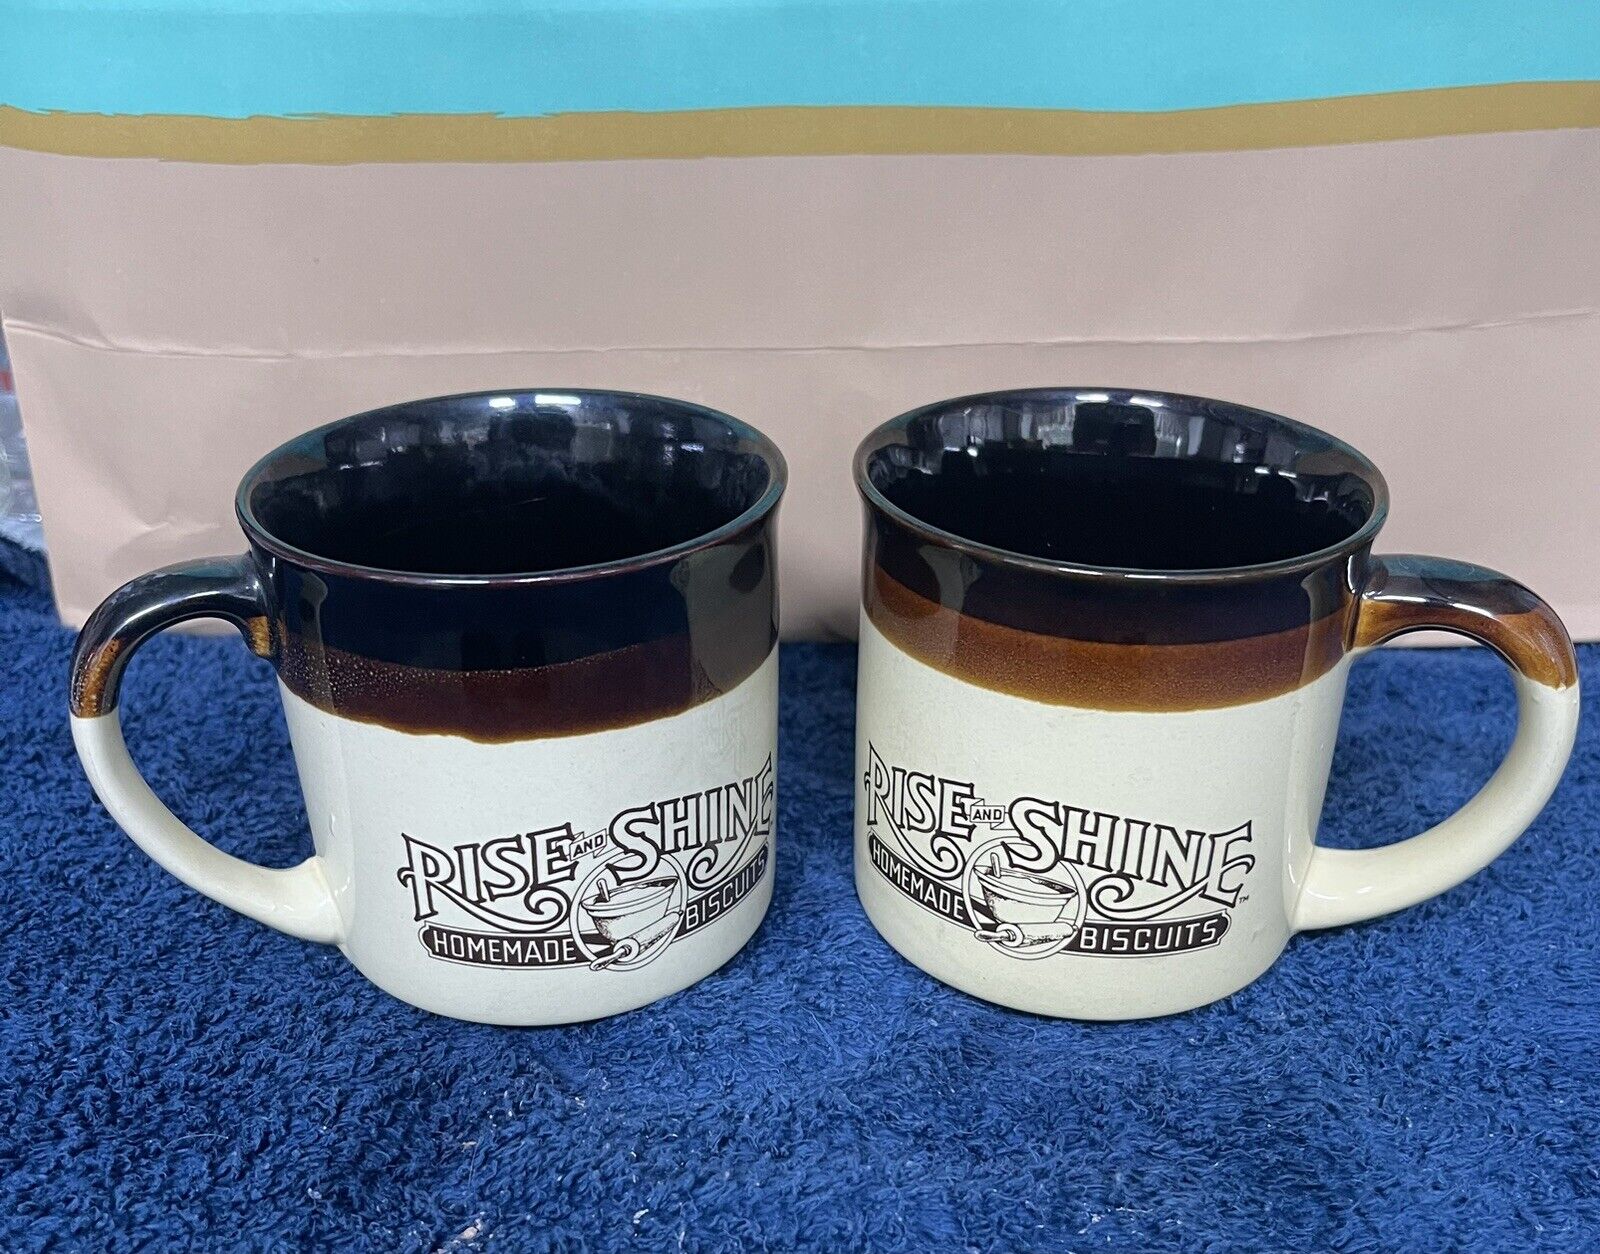 2 VINTAGE 1980’s HARDEE’S RISE & SHINE HOMEMADE BISCUITS COFFEE CUP MUG~Estate